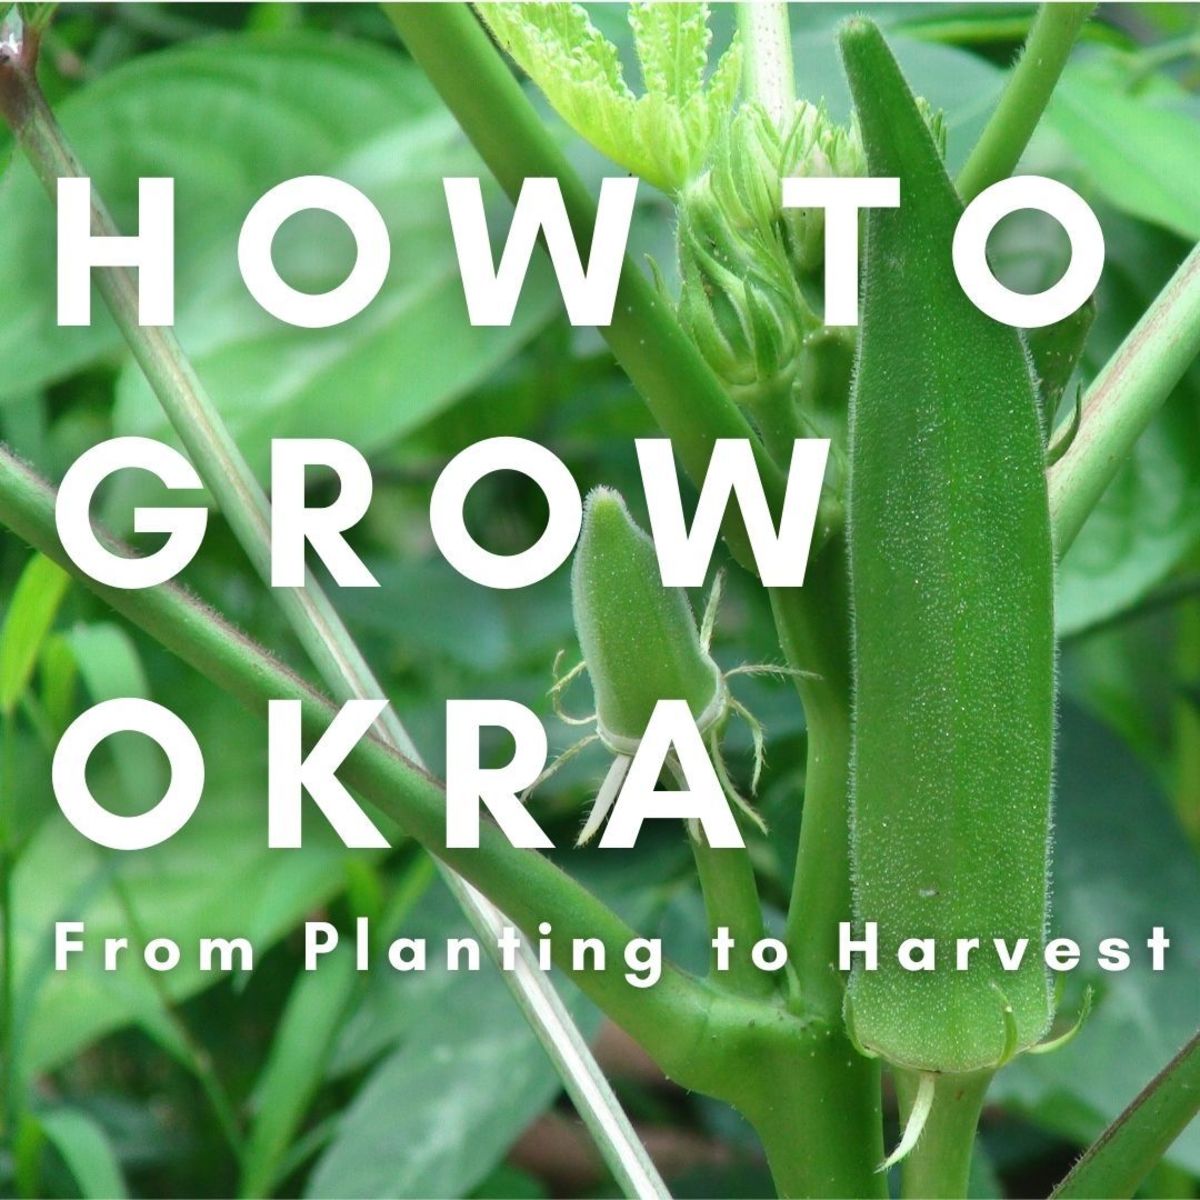 How to Successfully Grow Okra From Planting to Harvest